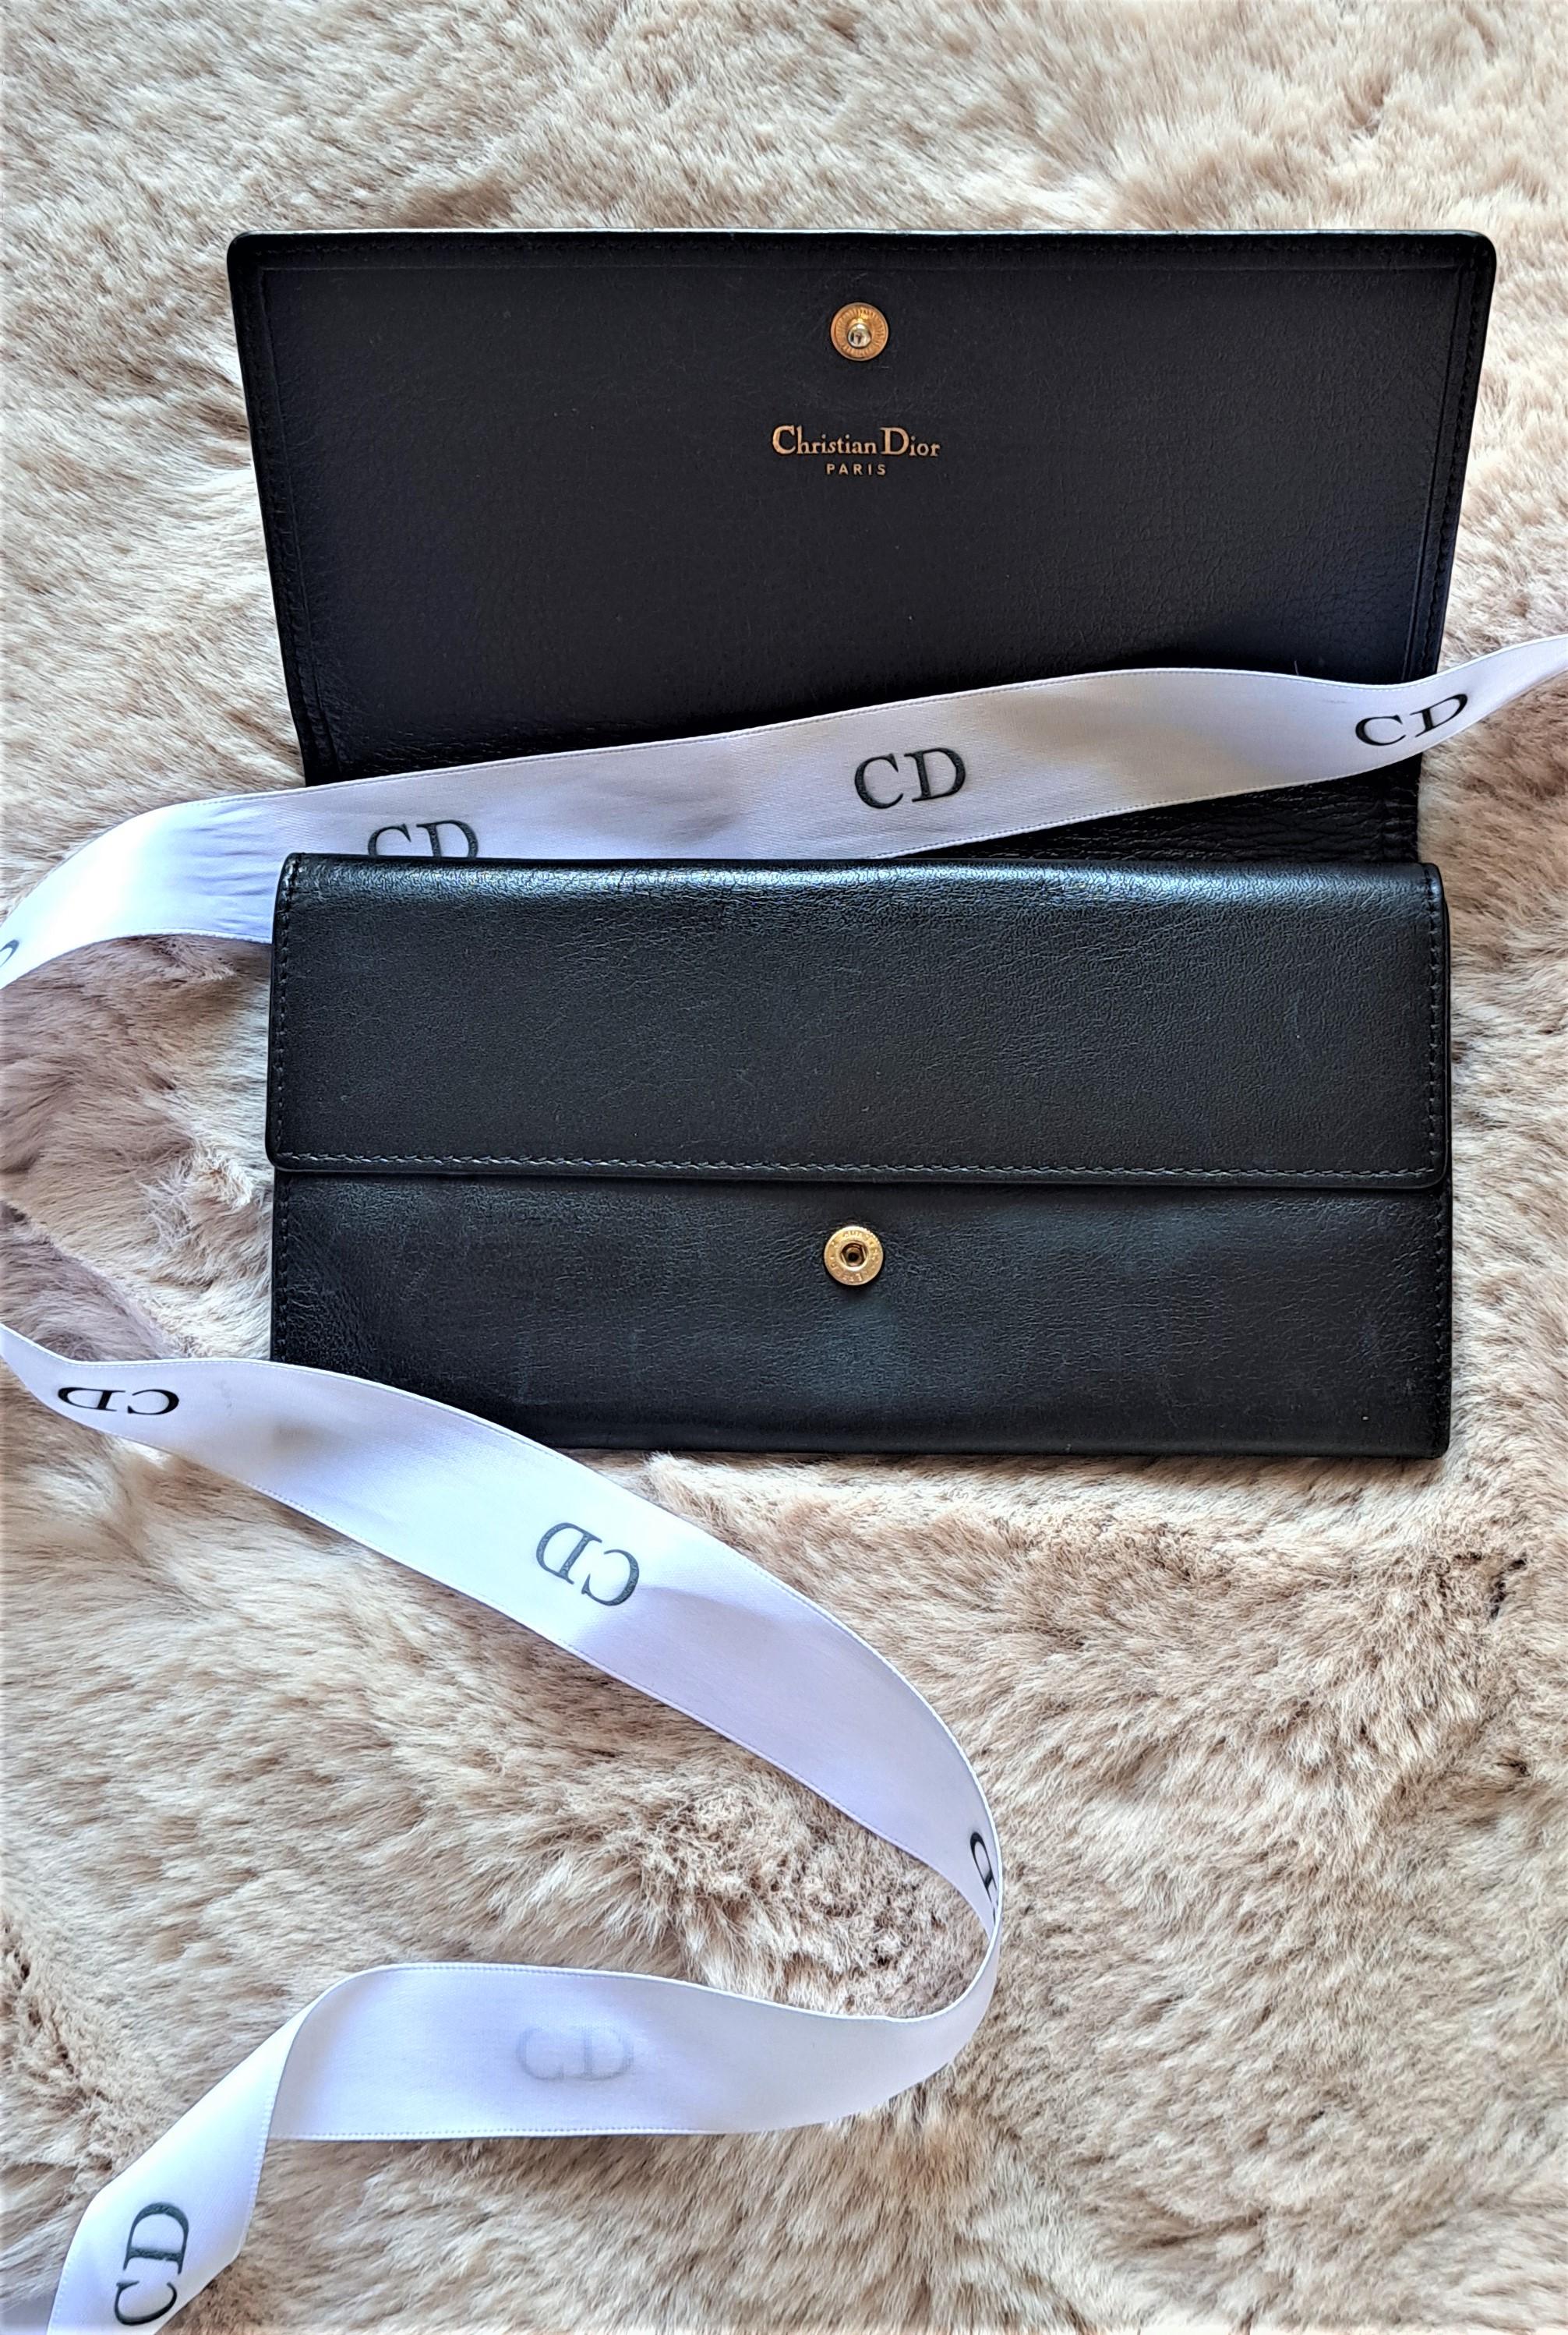 This beautiful 1990s calfskin Christian Dior black wallet with a golden charm logo is a classic and iconic accessory. 

During the 1990s, Dior experienced a resurgence in popularity, and their accessories, including wallets, became highly sought